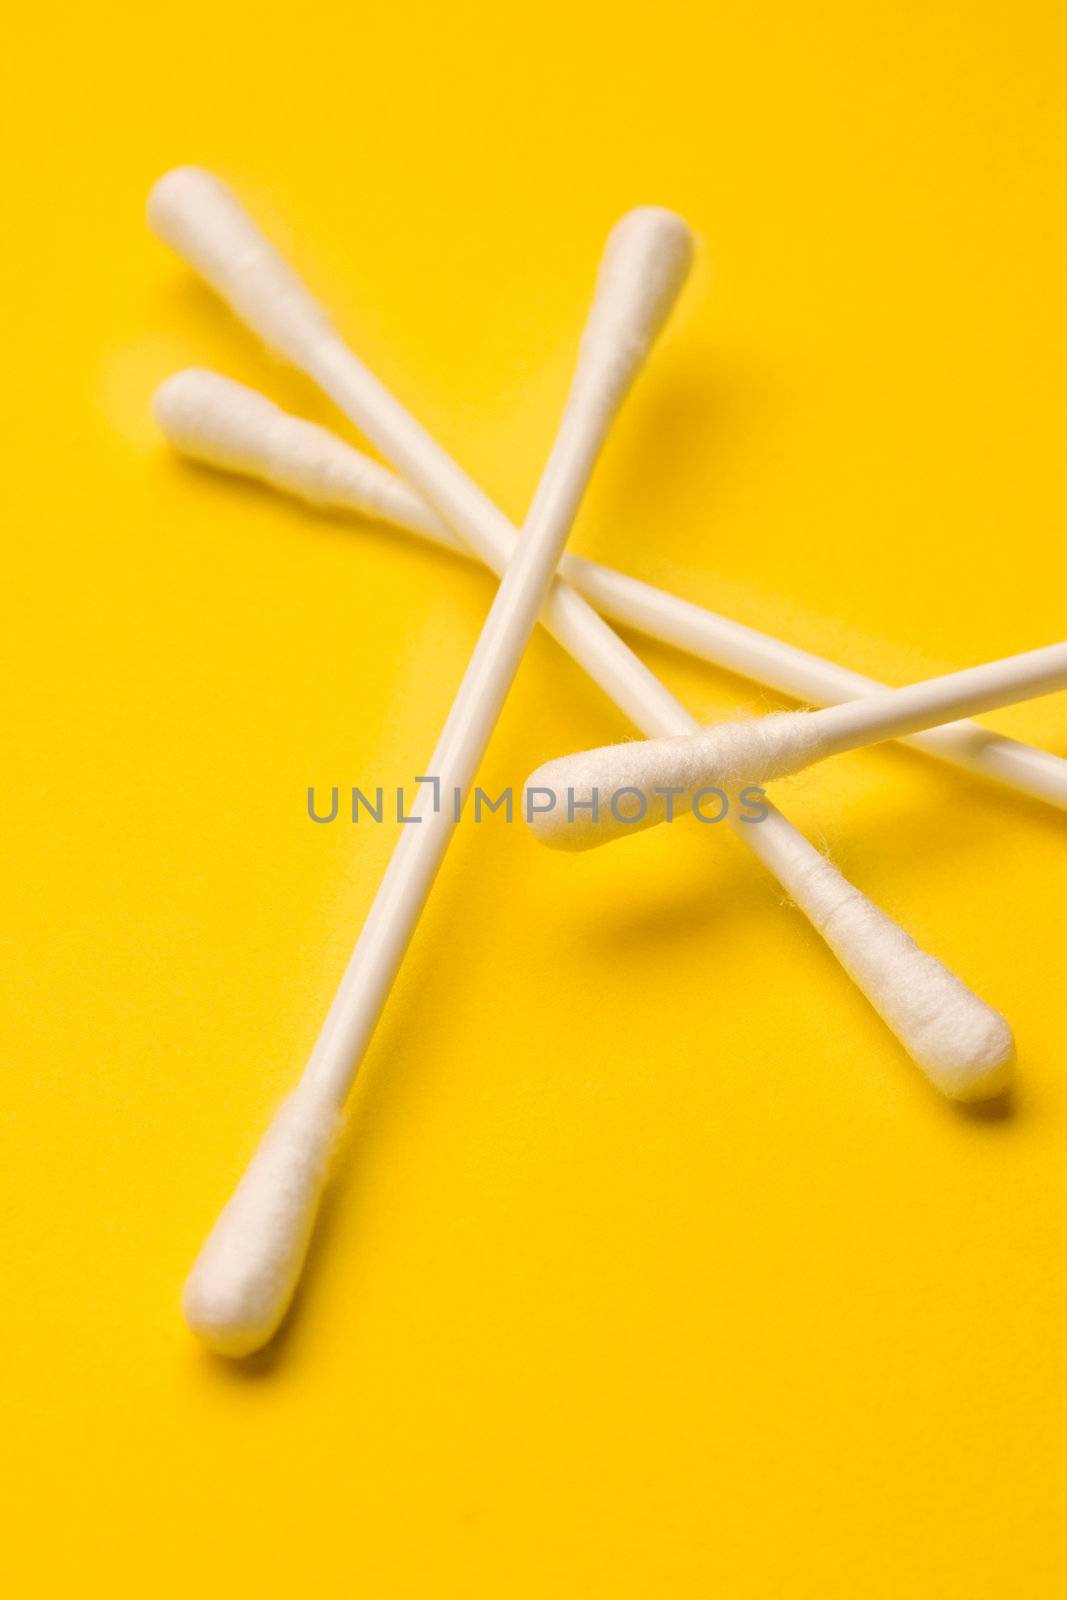 Cotton swabs isolated on yellow background by Garsya